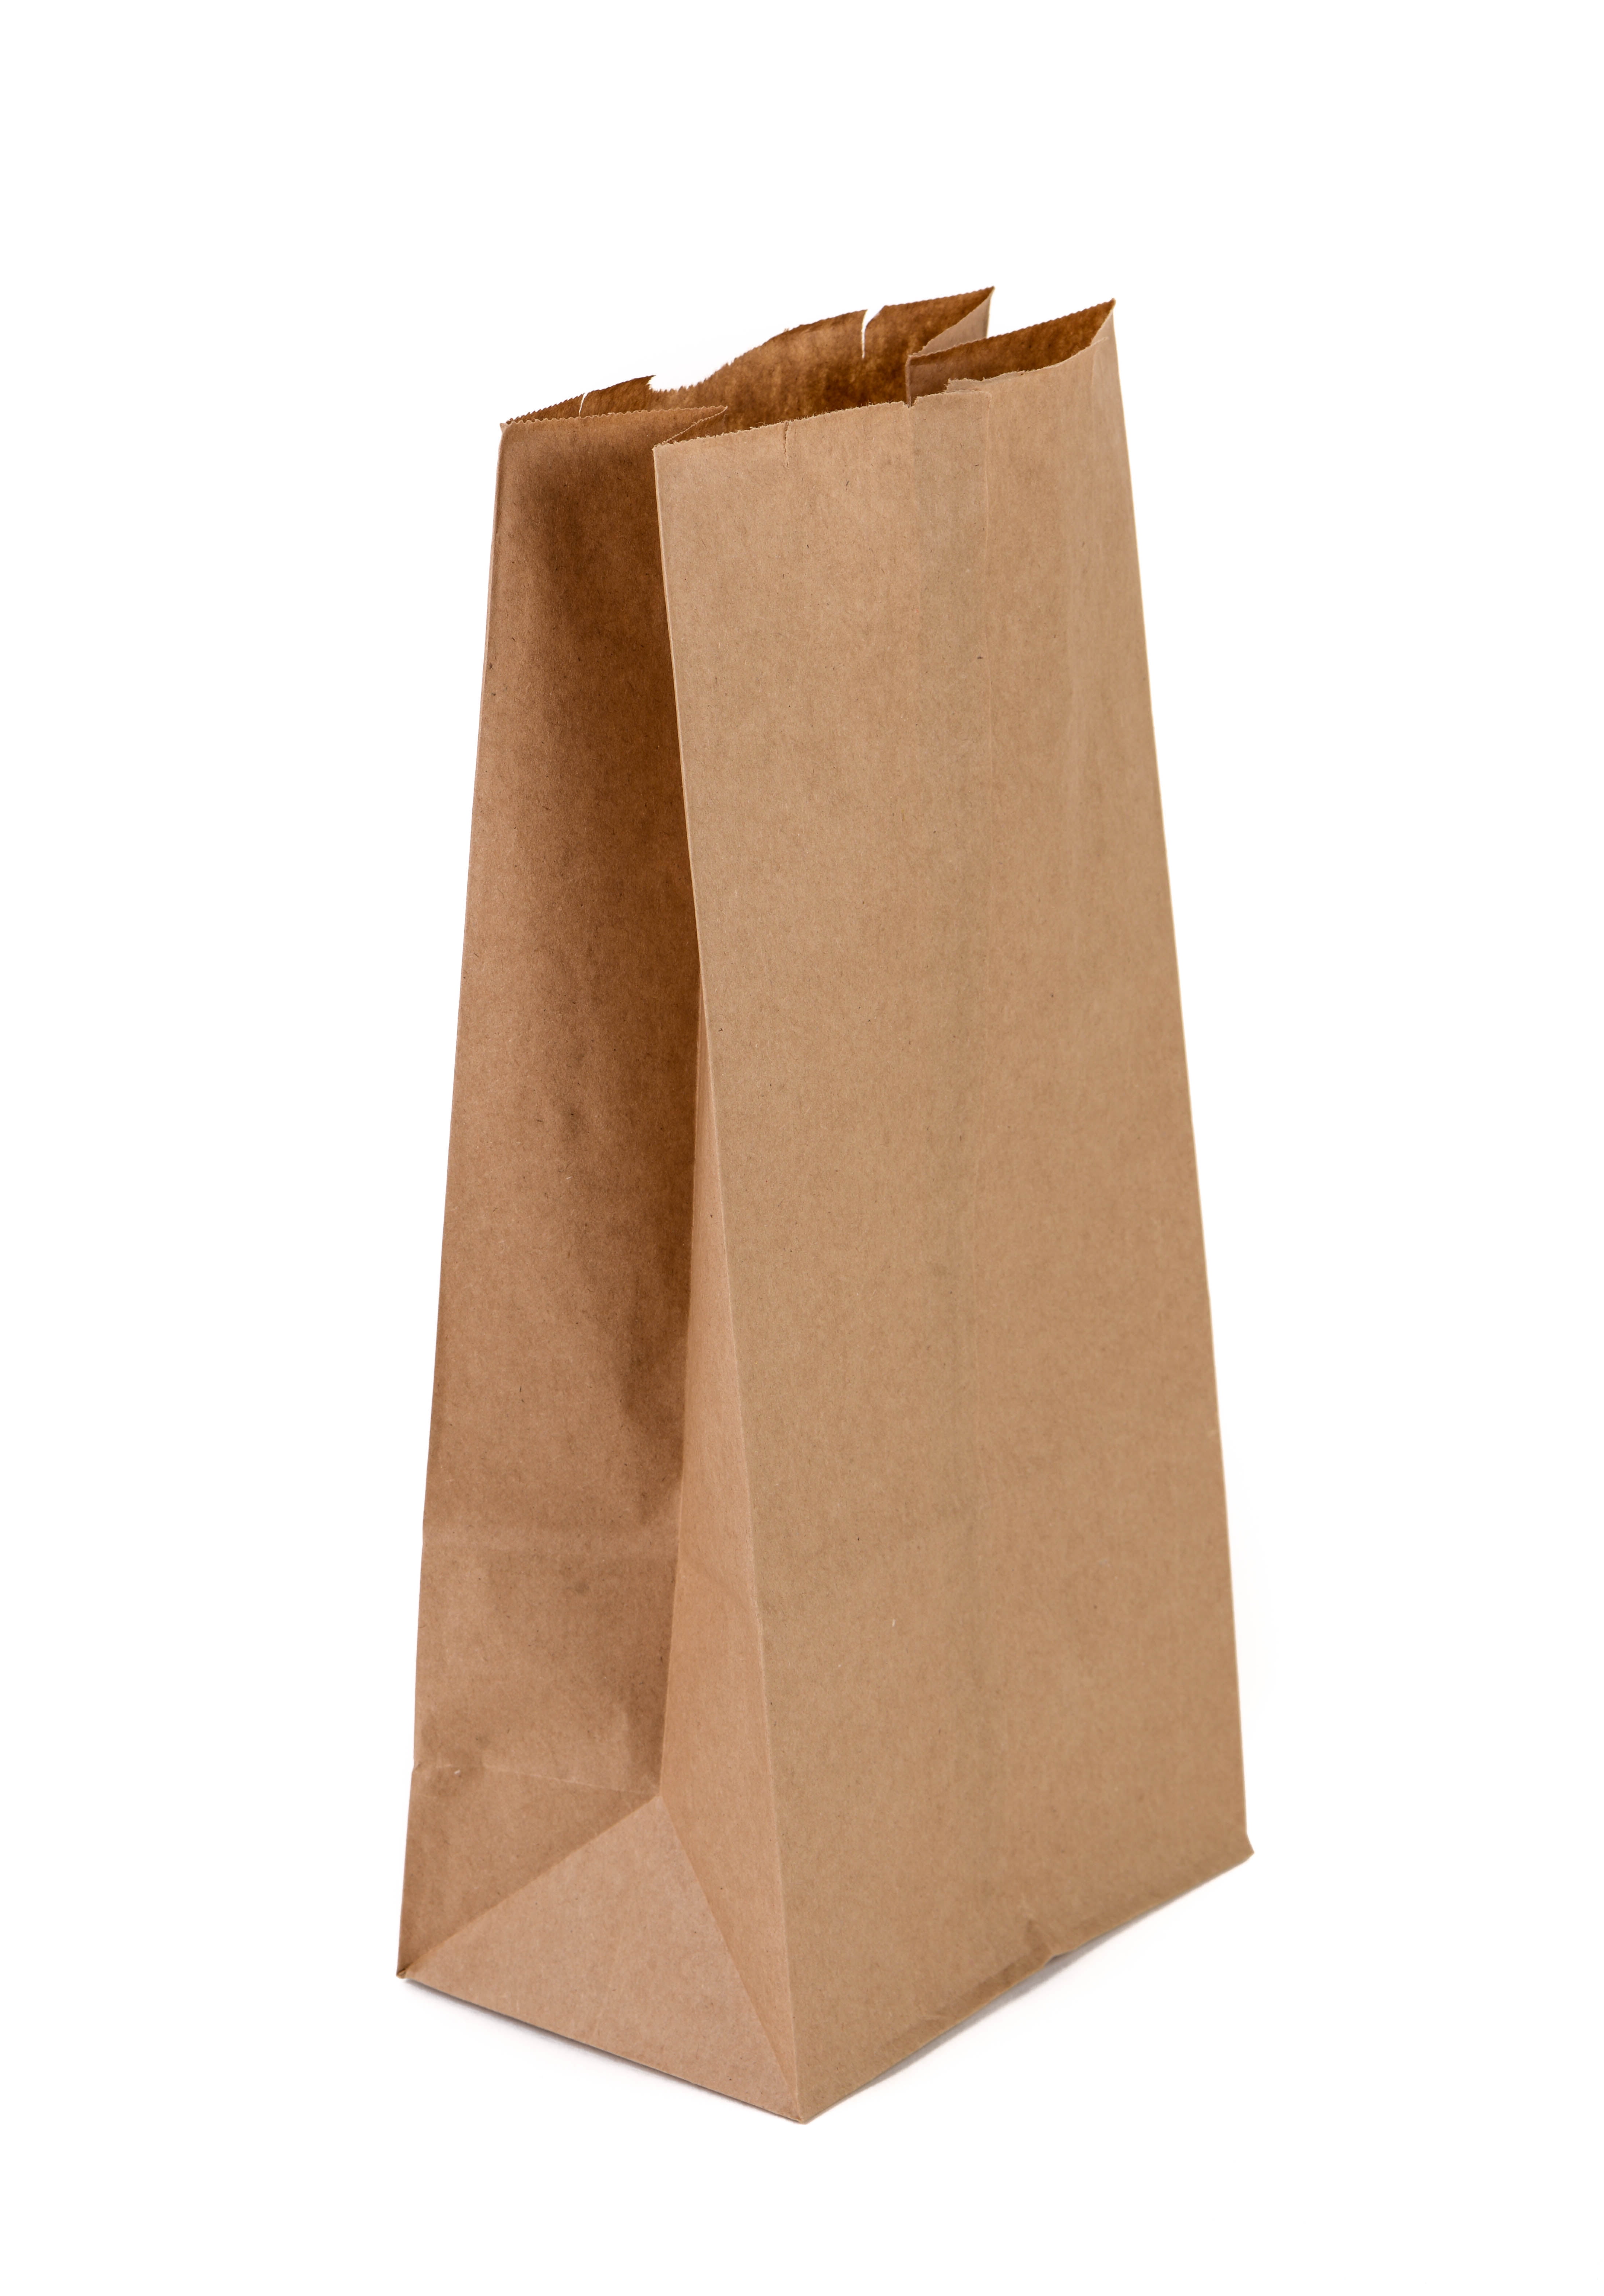 50 WHITE SMALL KRAFT PAPER SOS FOOD CARRIER BAGS WITH HANDLES PARTY TAKEAWAY 